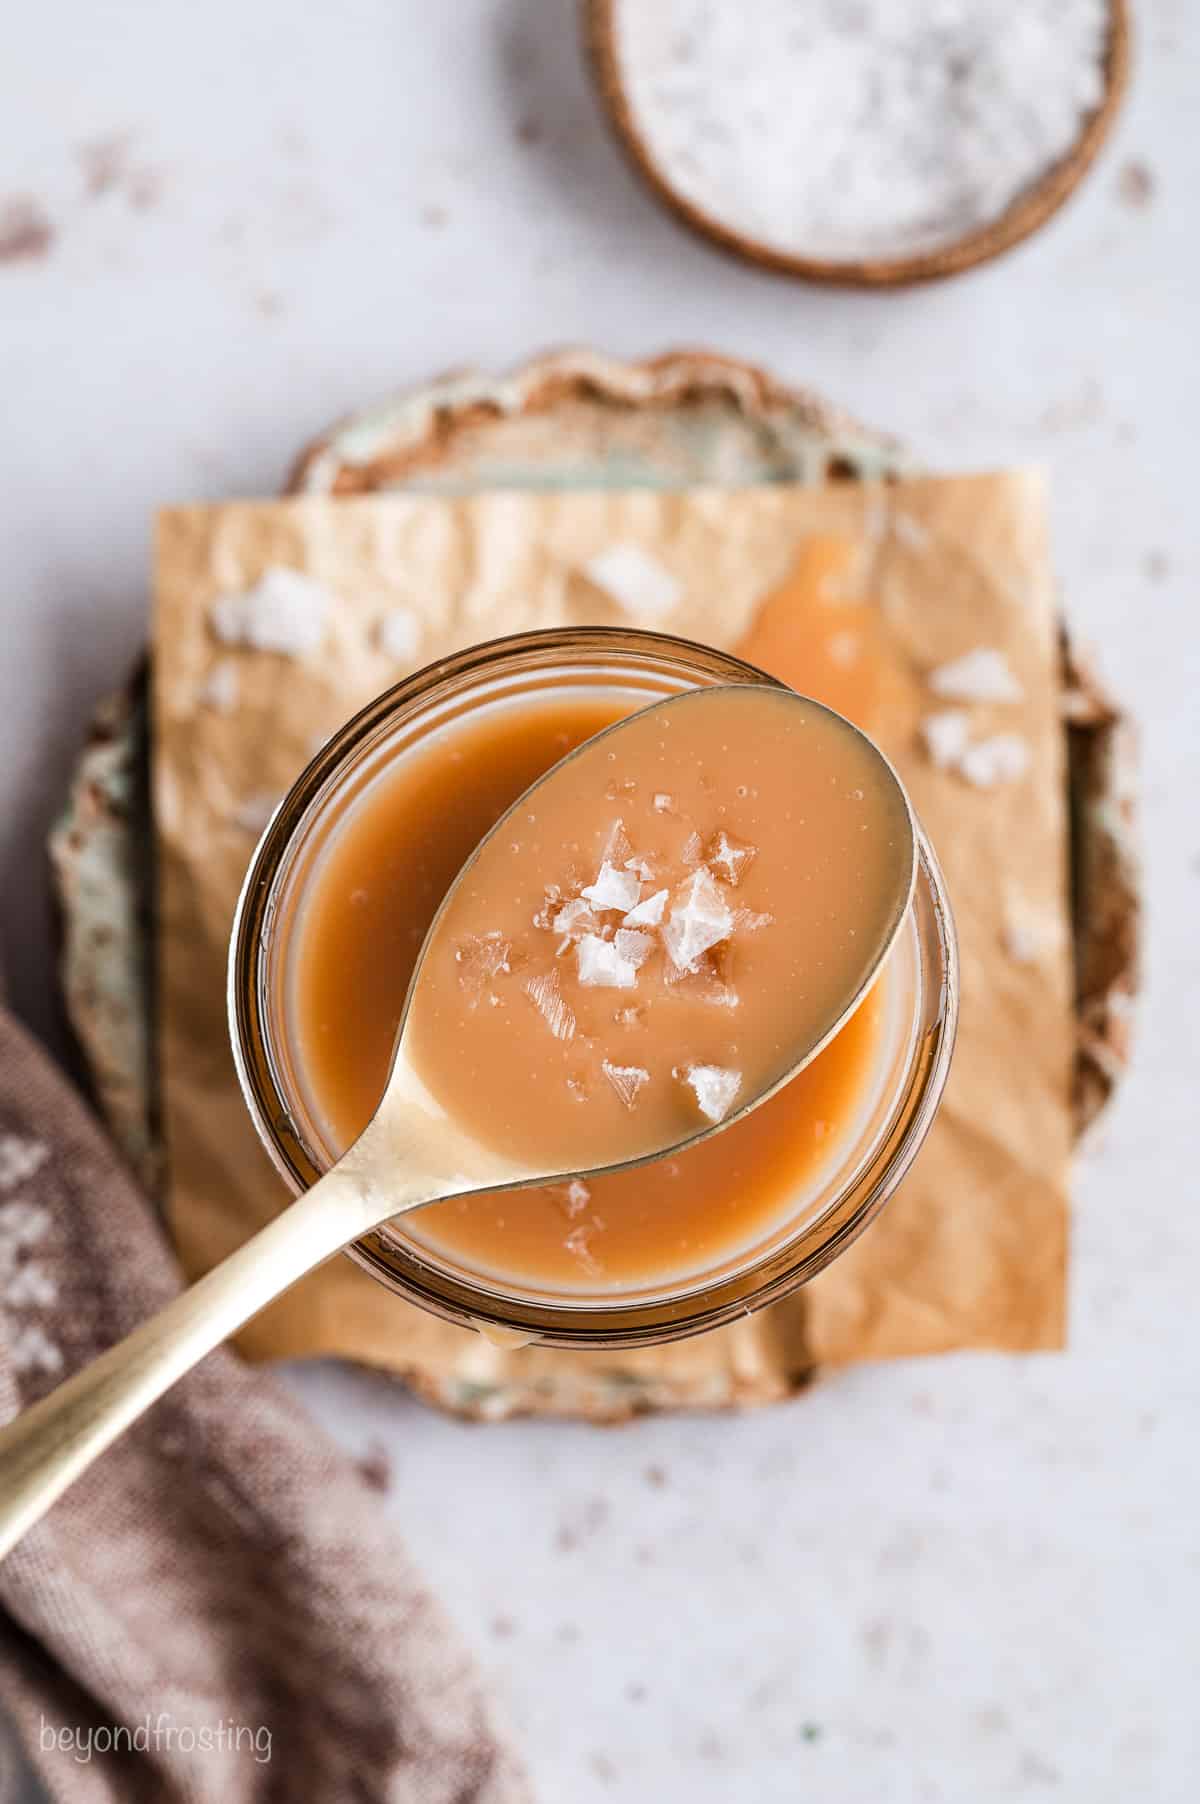 Overhead view of a spoonful of salted caramel held over a jar.